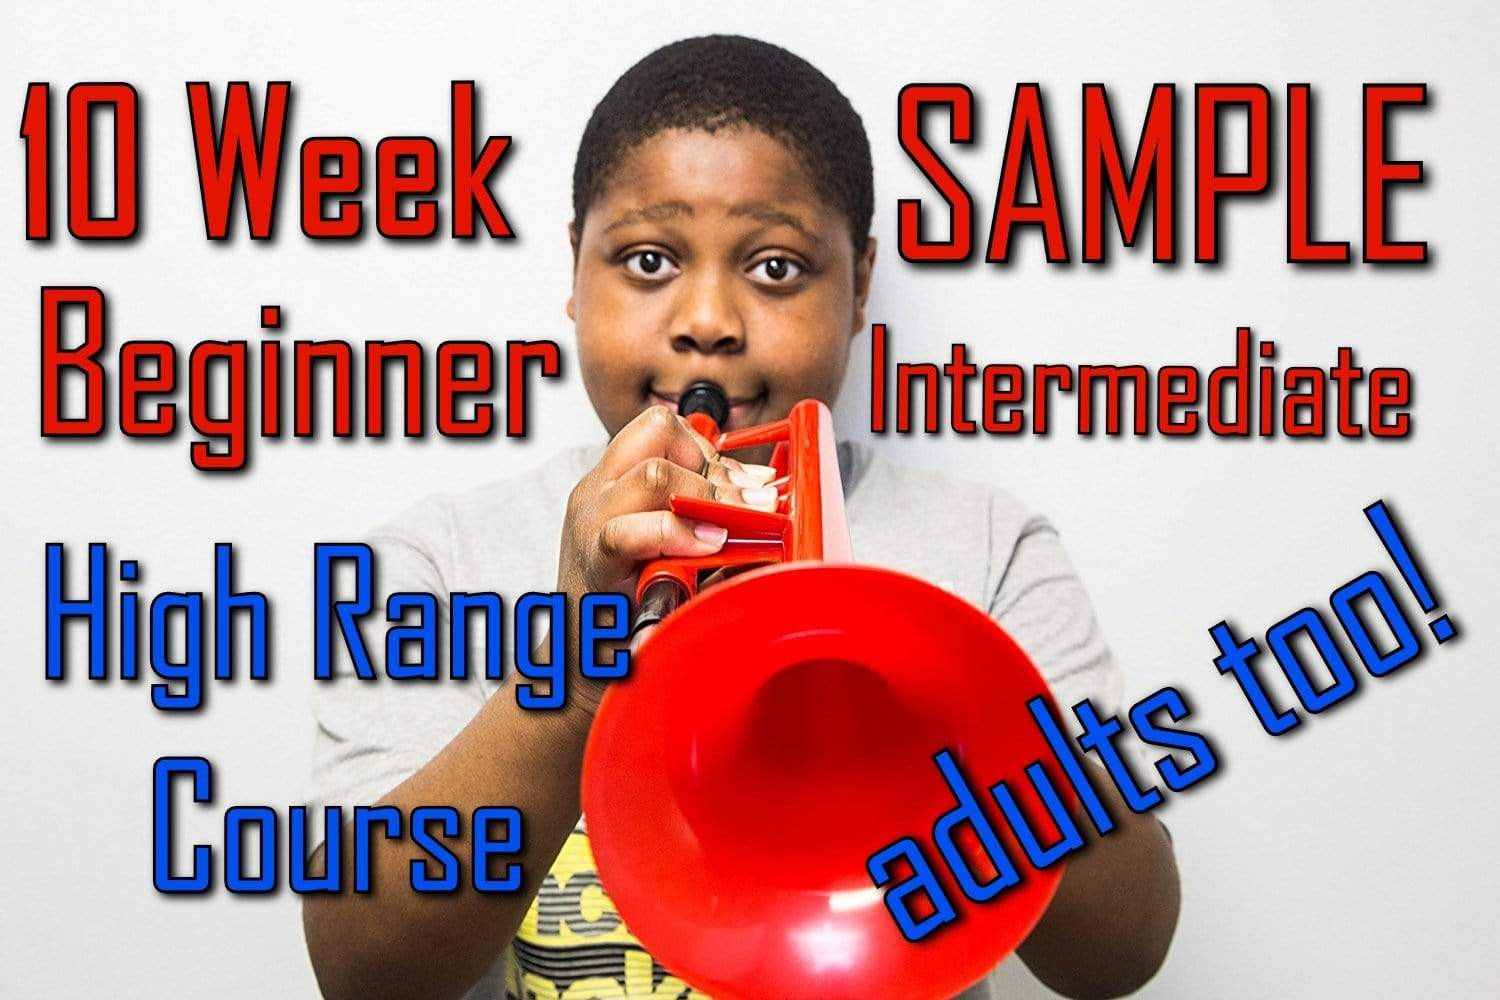 Sample The 10 Week Beginner-Intermediate Upper Register Course for Trumpet and all Brass Players - Trumpetsizzle